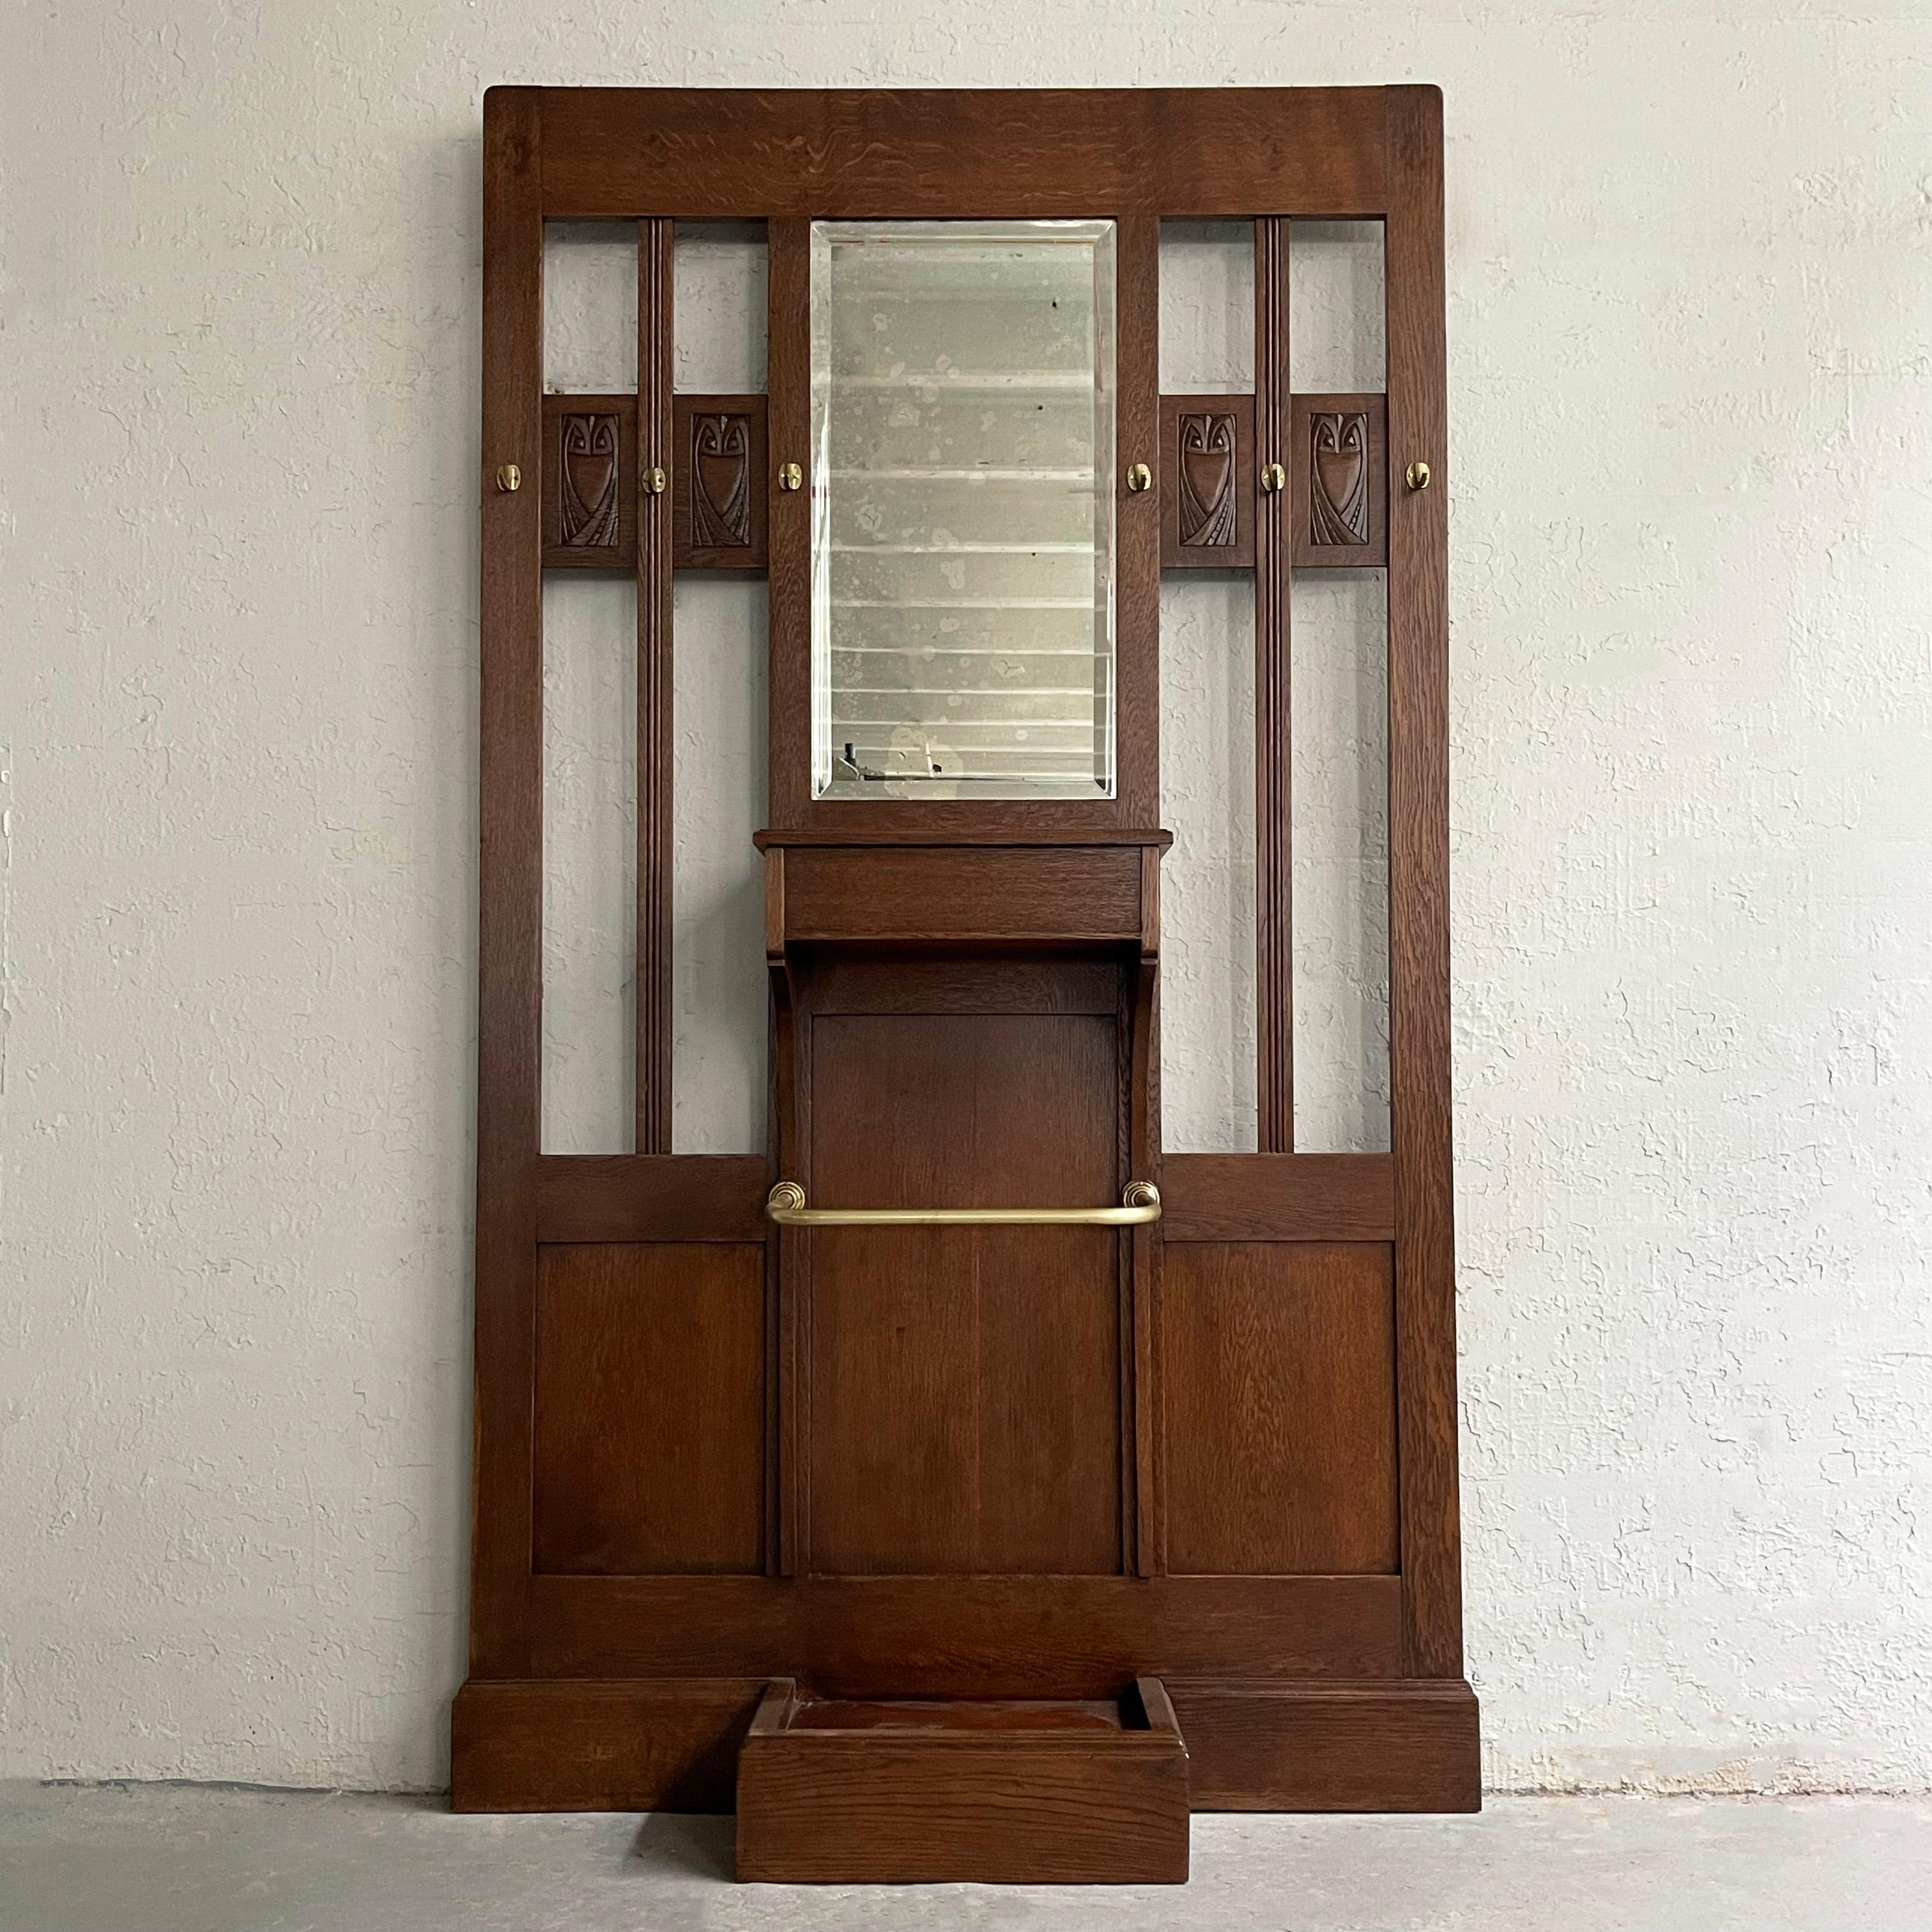 Early 20th century, arts and crafts, oak, entryway hall tree with carved owl motif features a beveled mirror with storage box and brass hooks and umbrella stand bar.